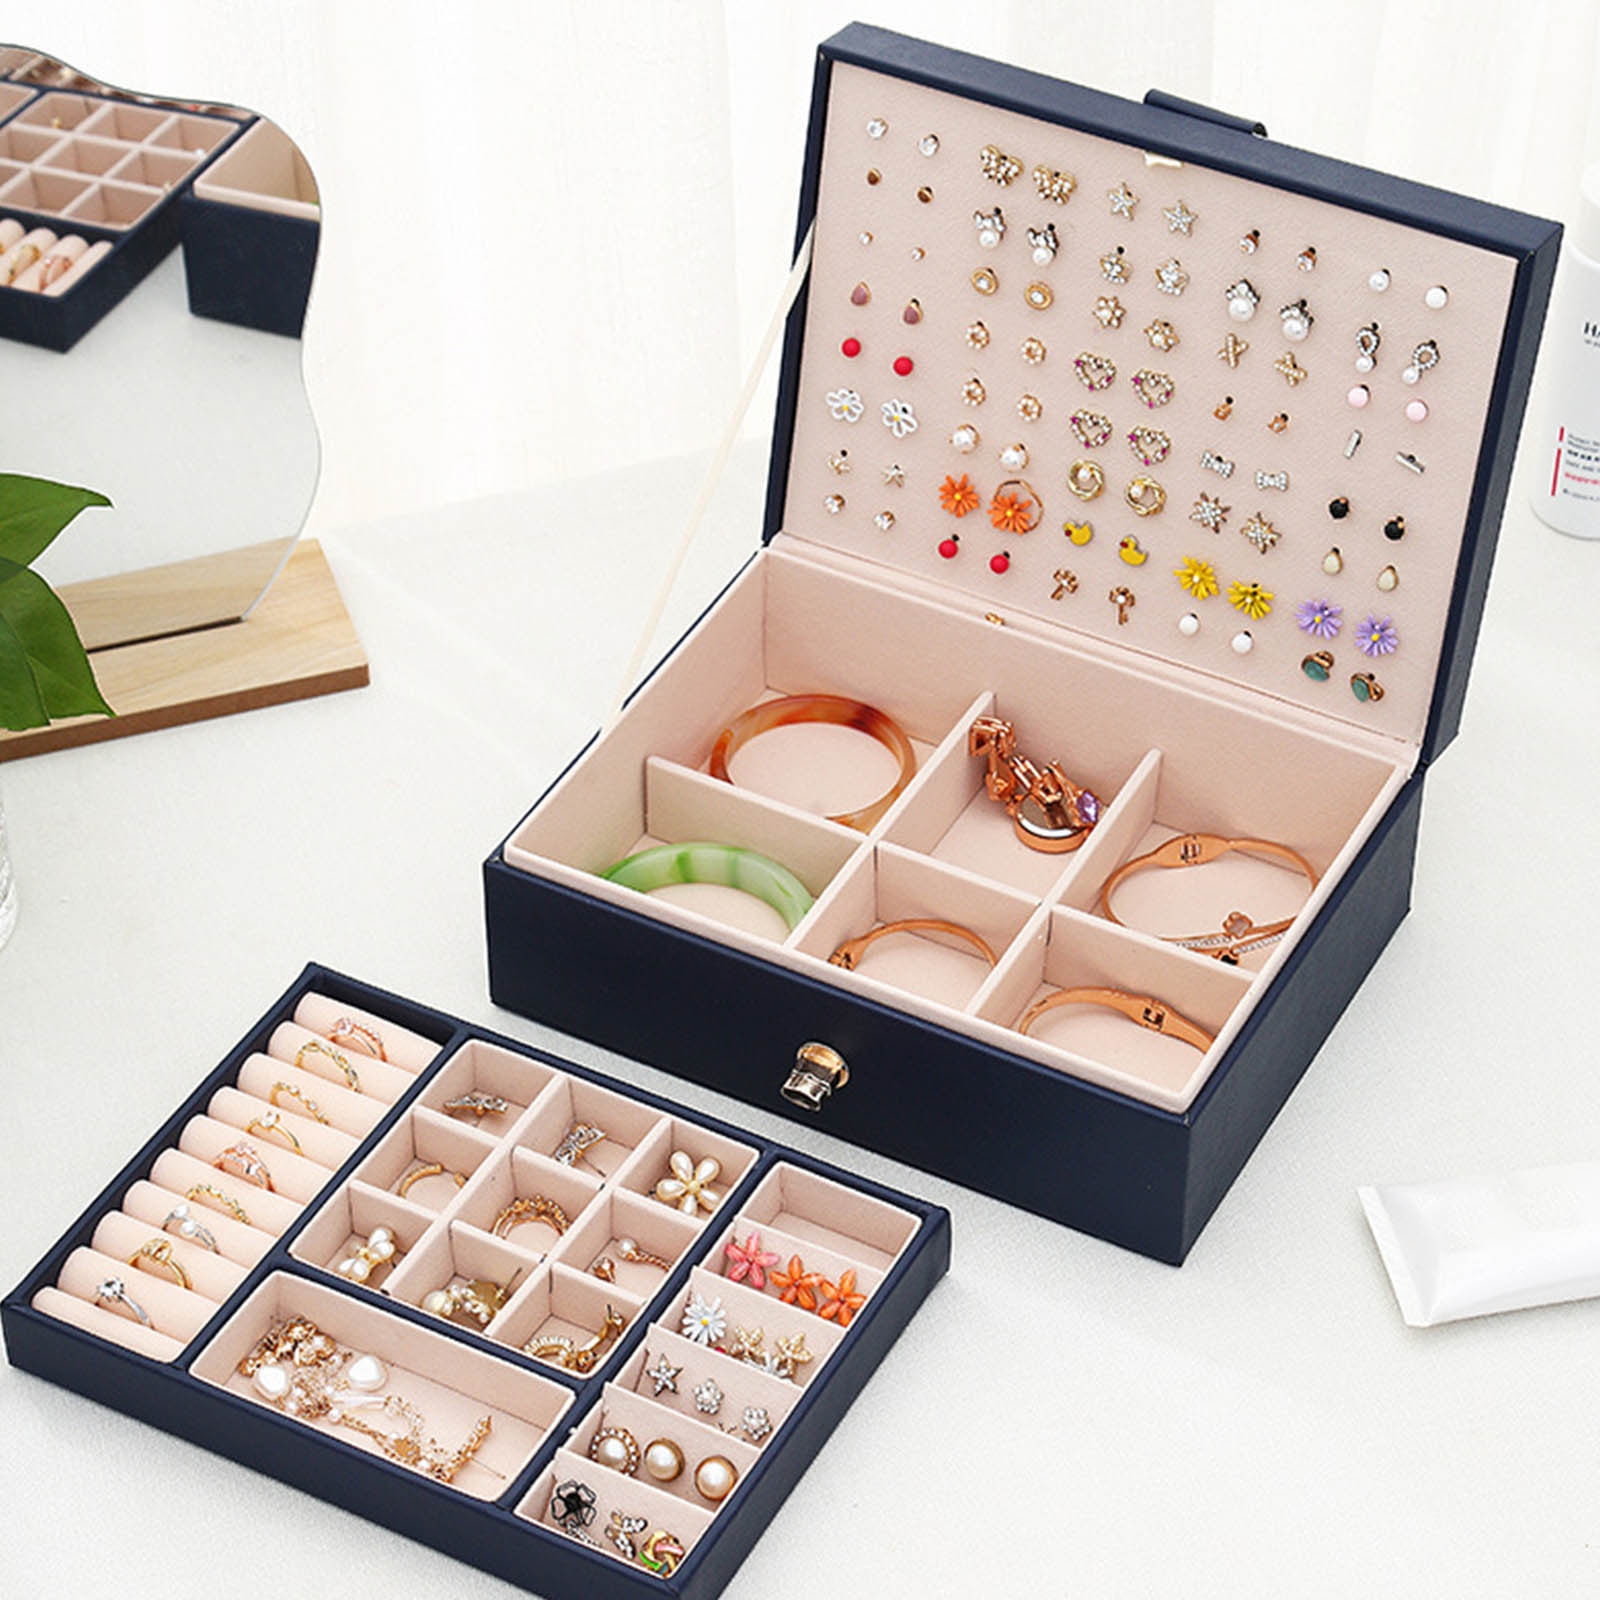 Wooden Jewelry Boxes: Organize Your Treasures | Buy Online